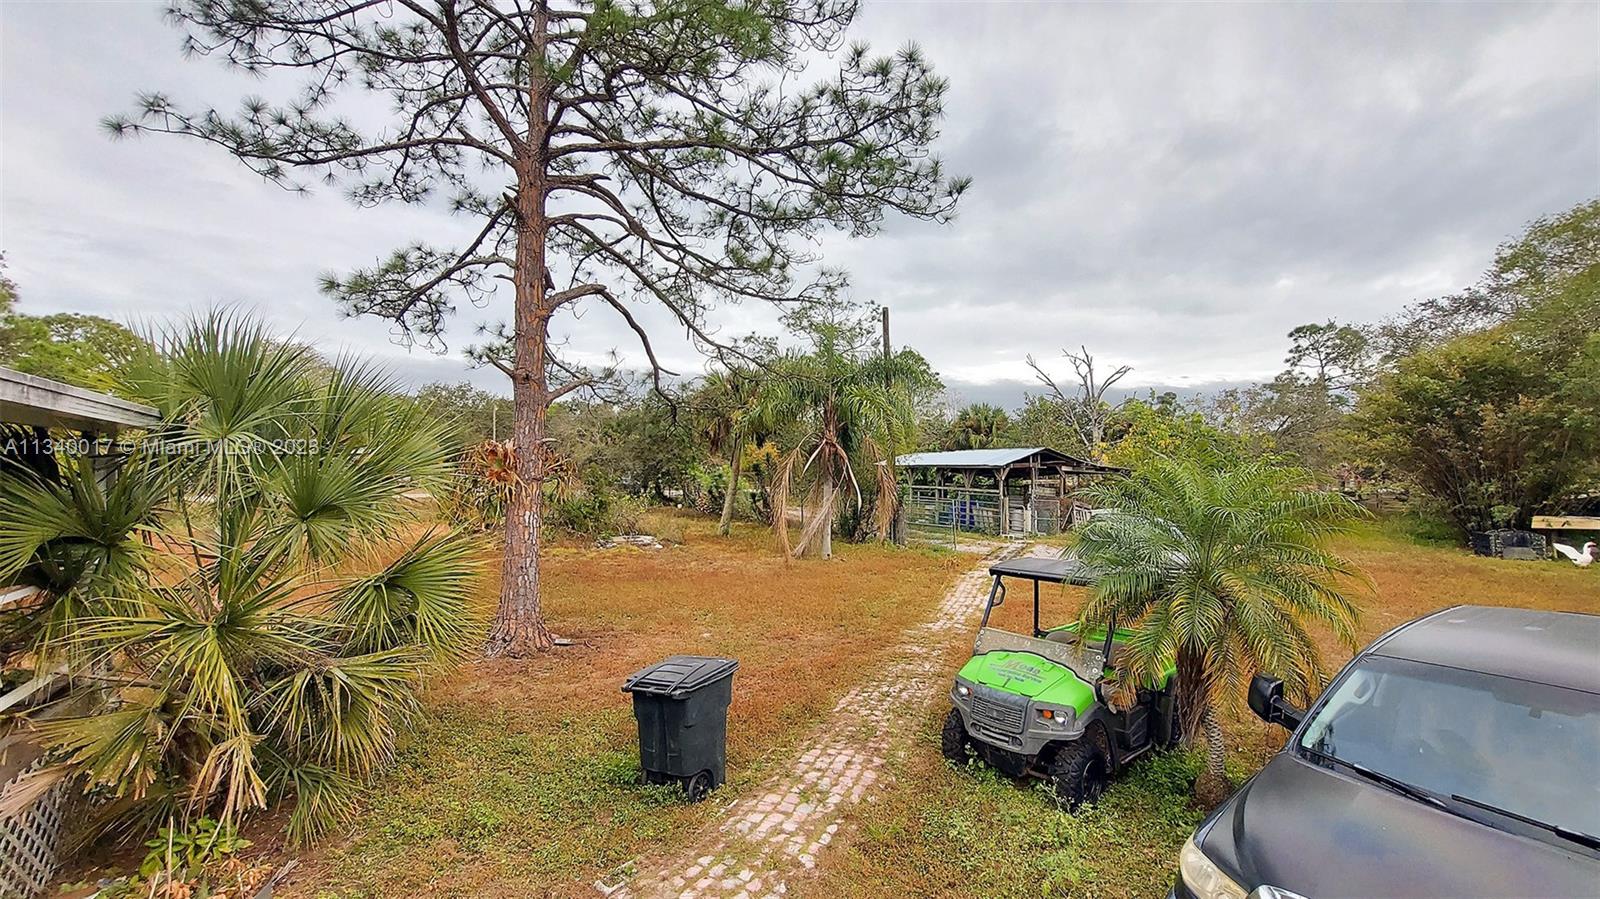 487  avenida del sur  other city - in the state of florida, FL 33440